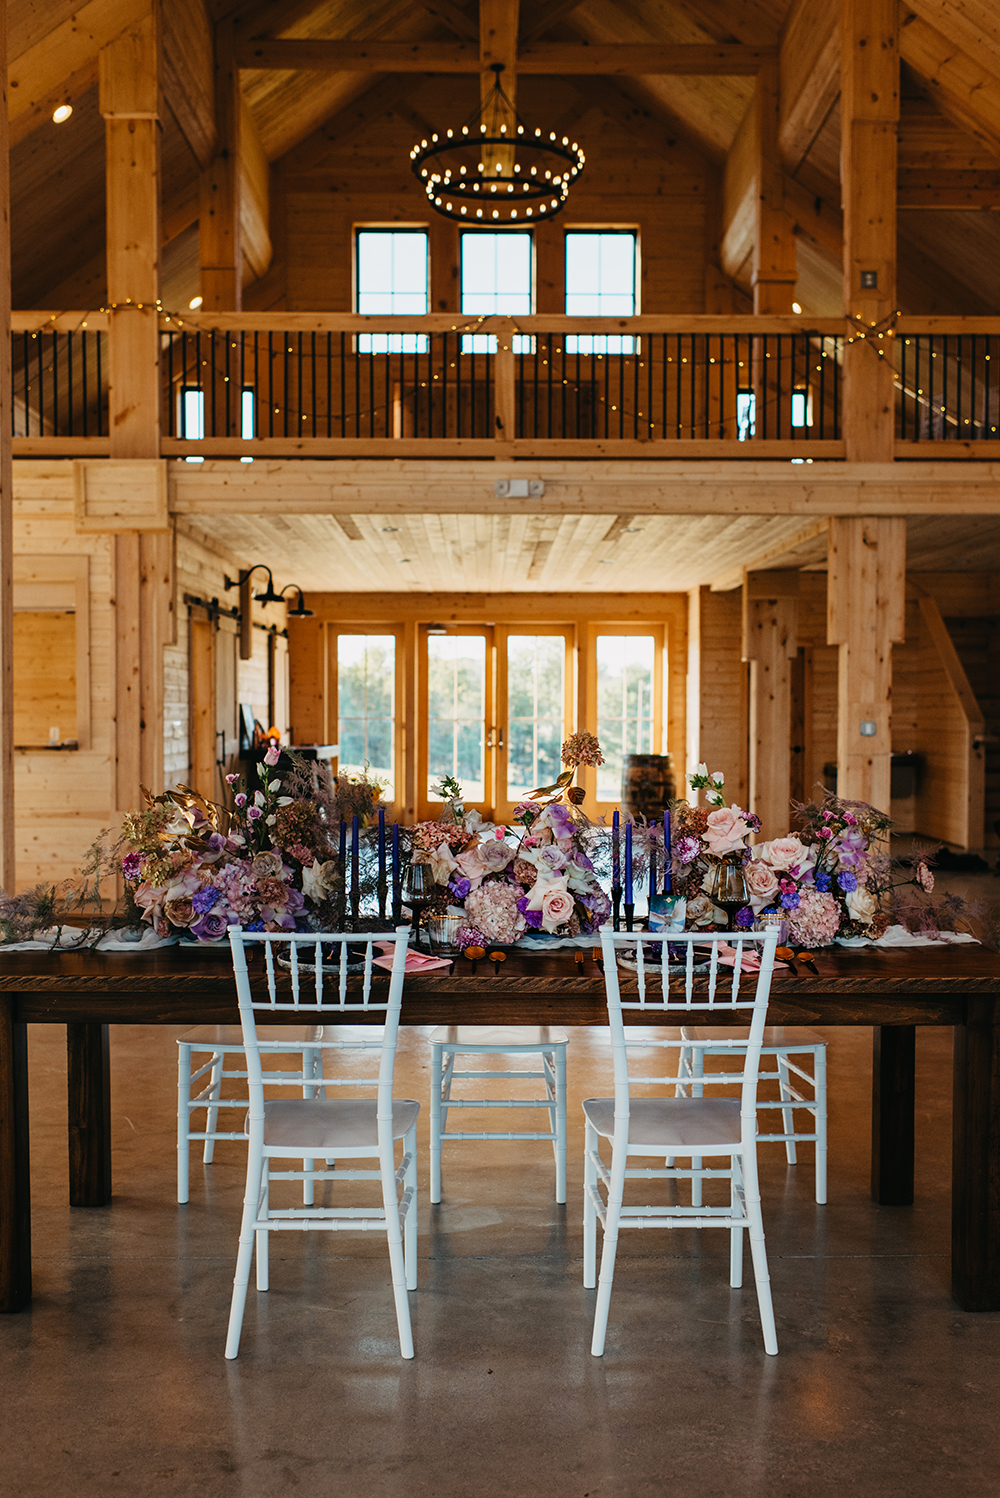 The wedding reception strikes with lush florals at once, and deep colored candles complete the look